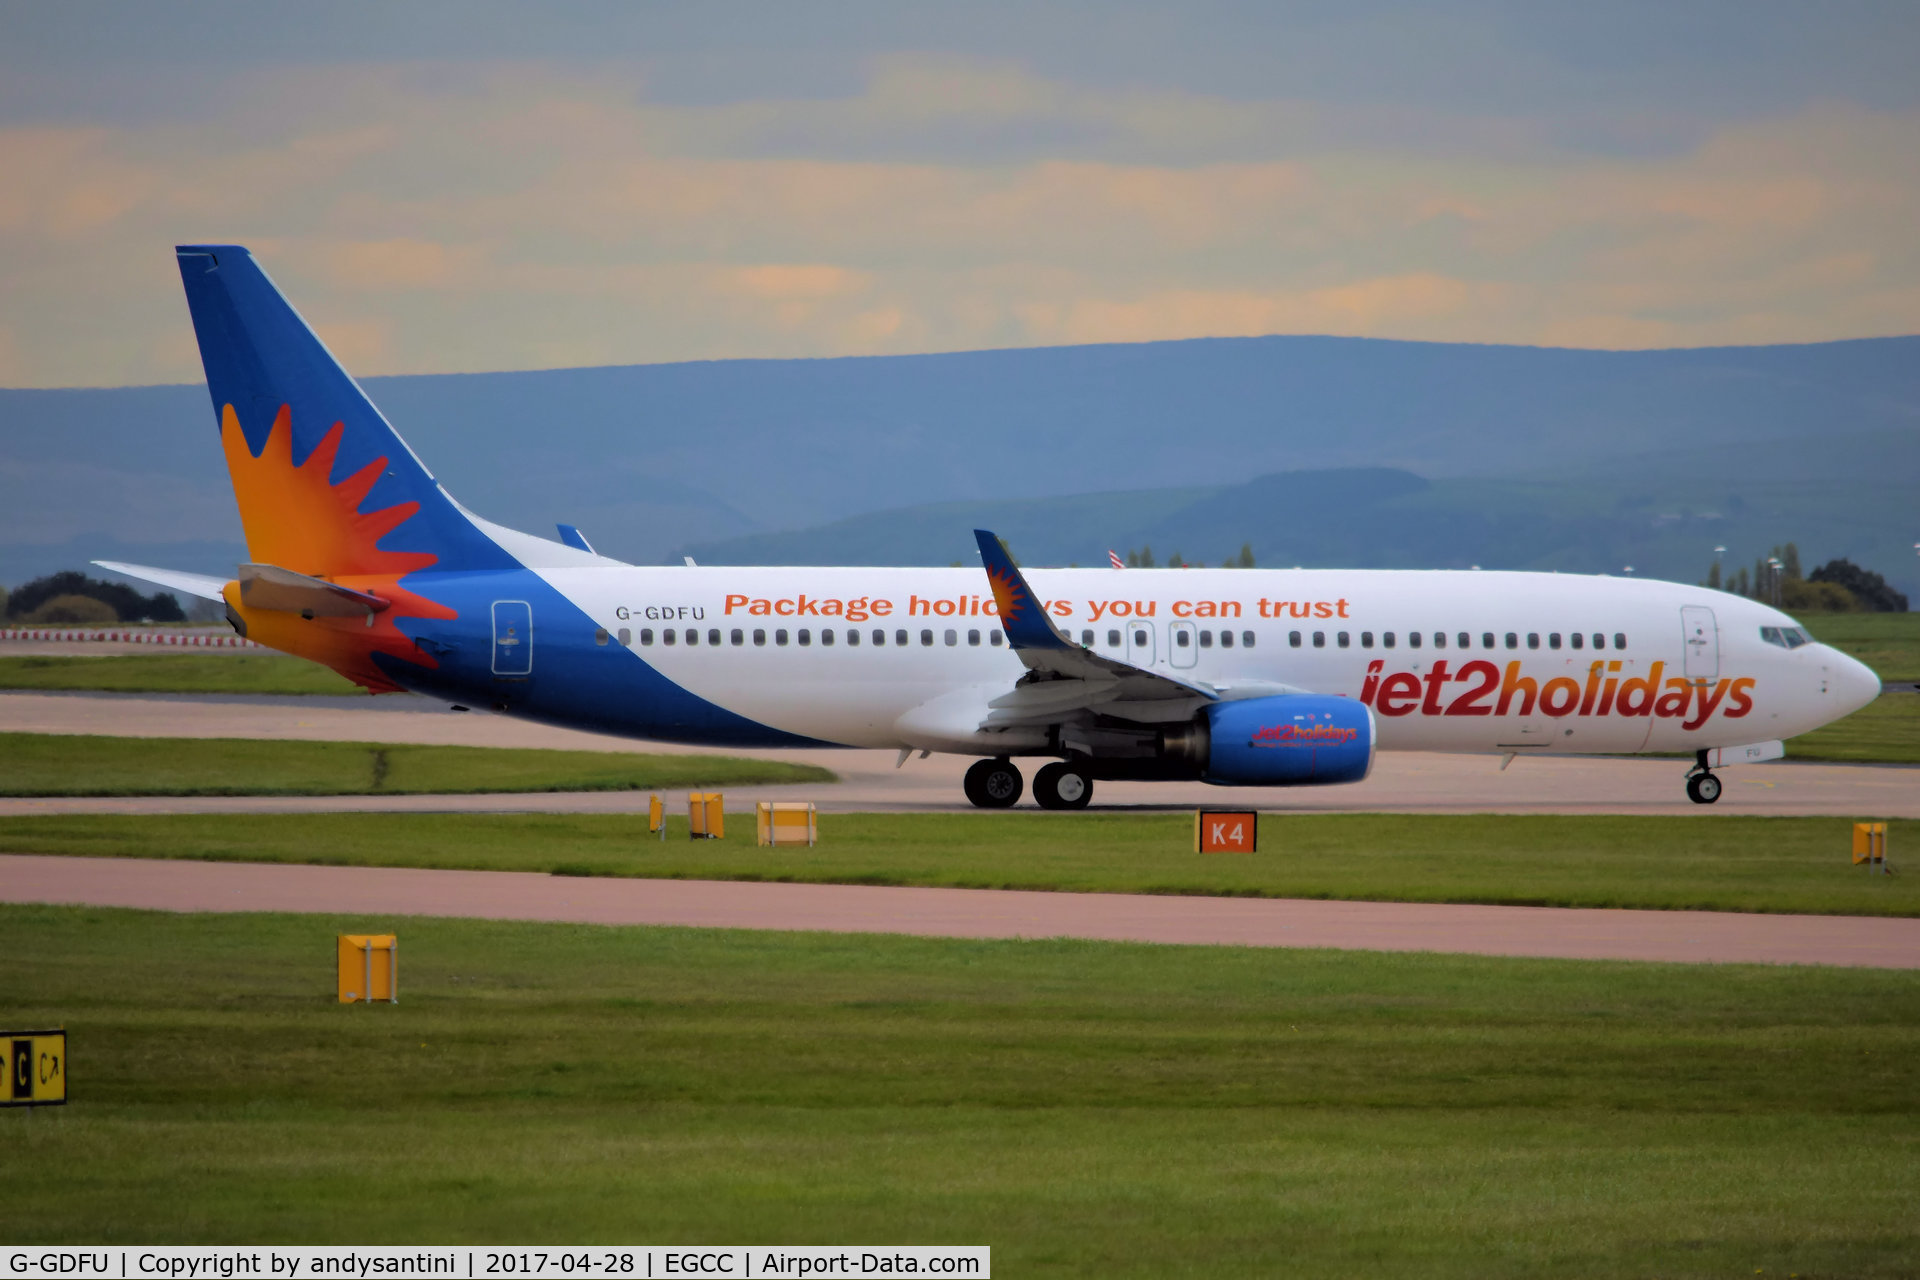 G-GDFU, 2001 Boeing 737-8K5 C/N 30416, taxing out for take off on 23L